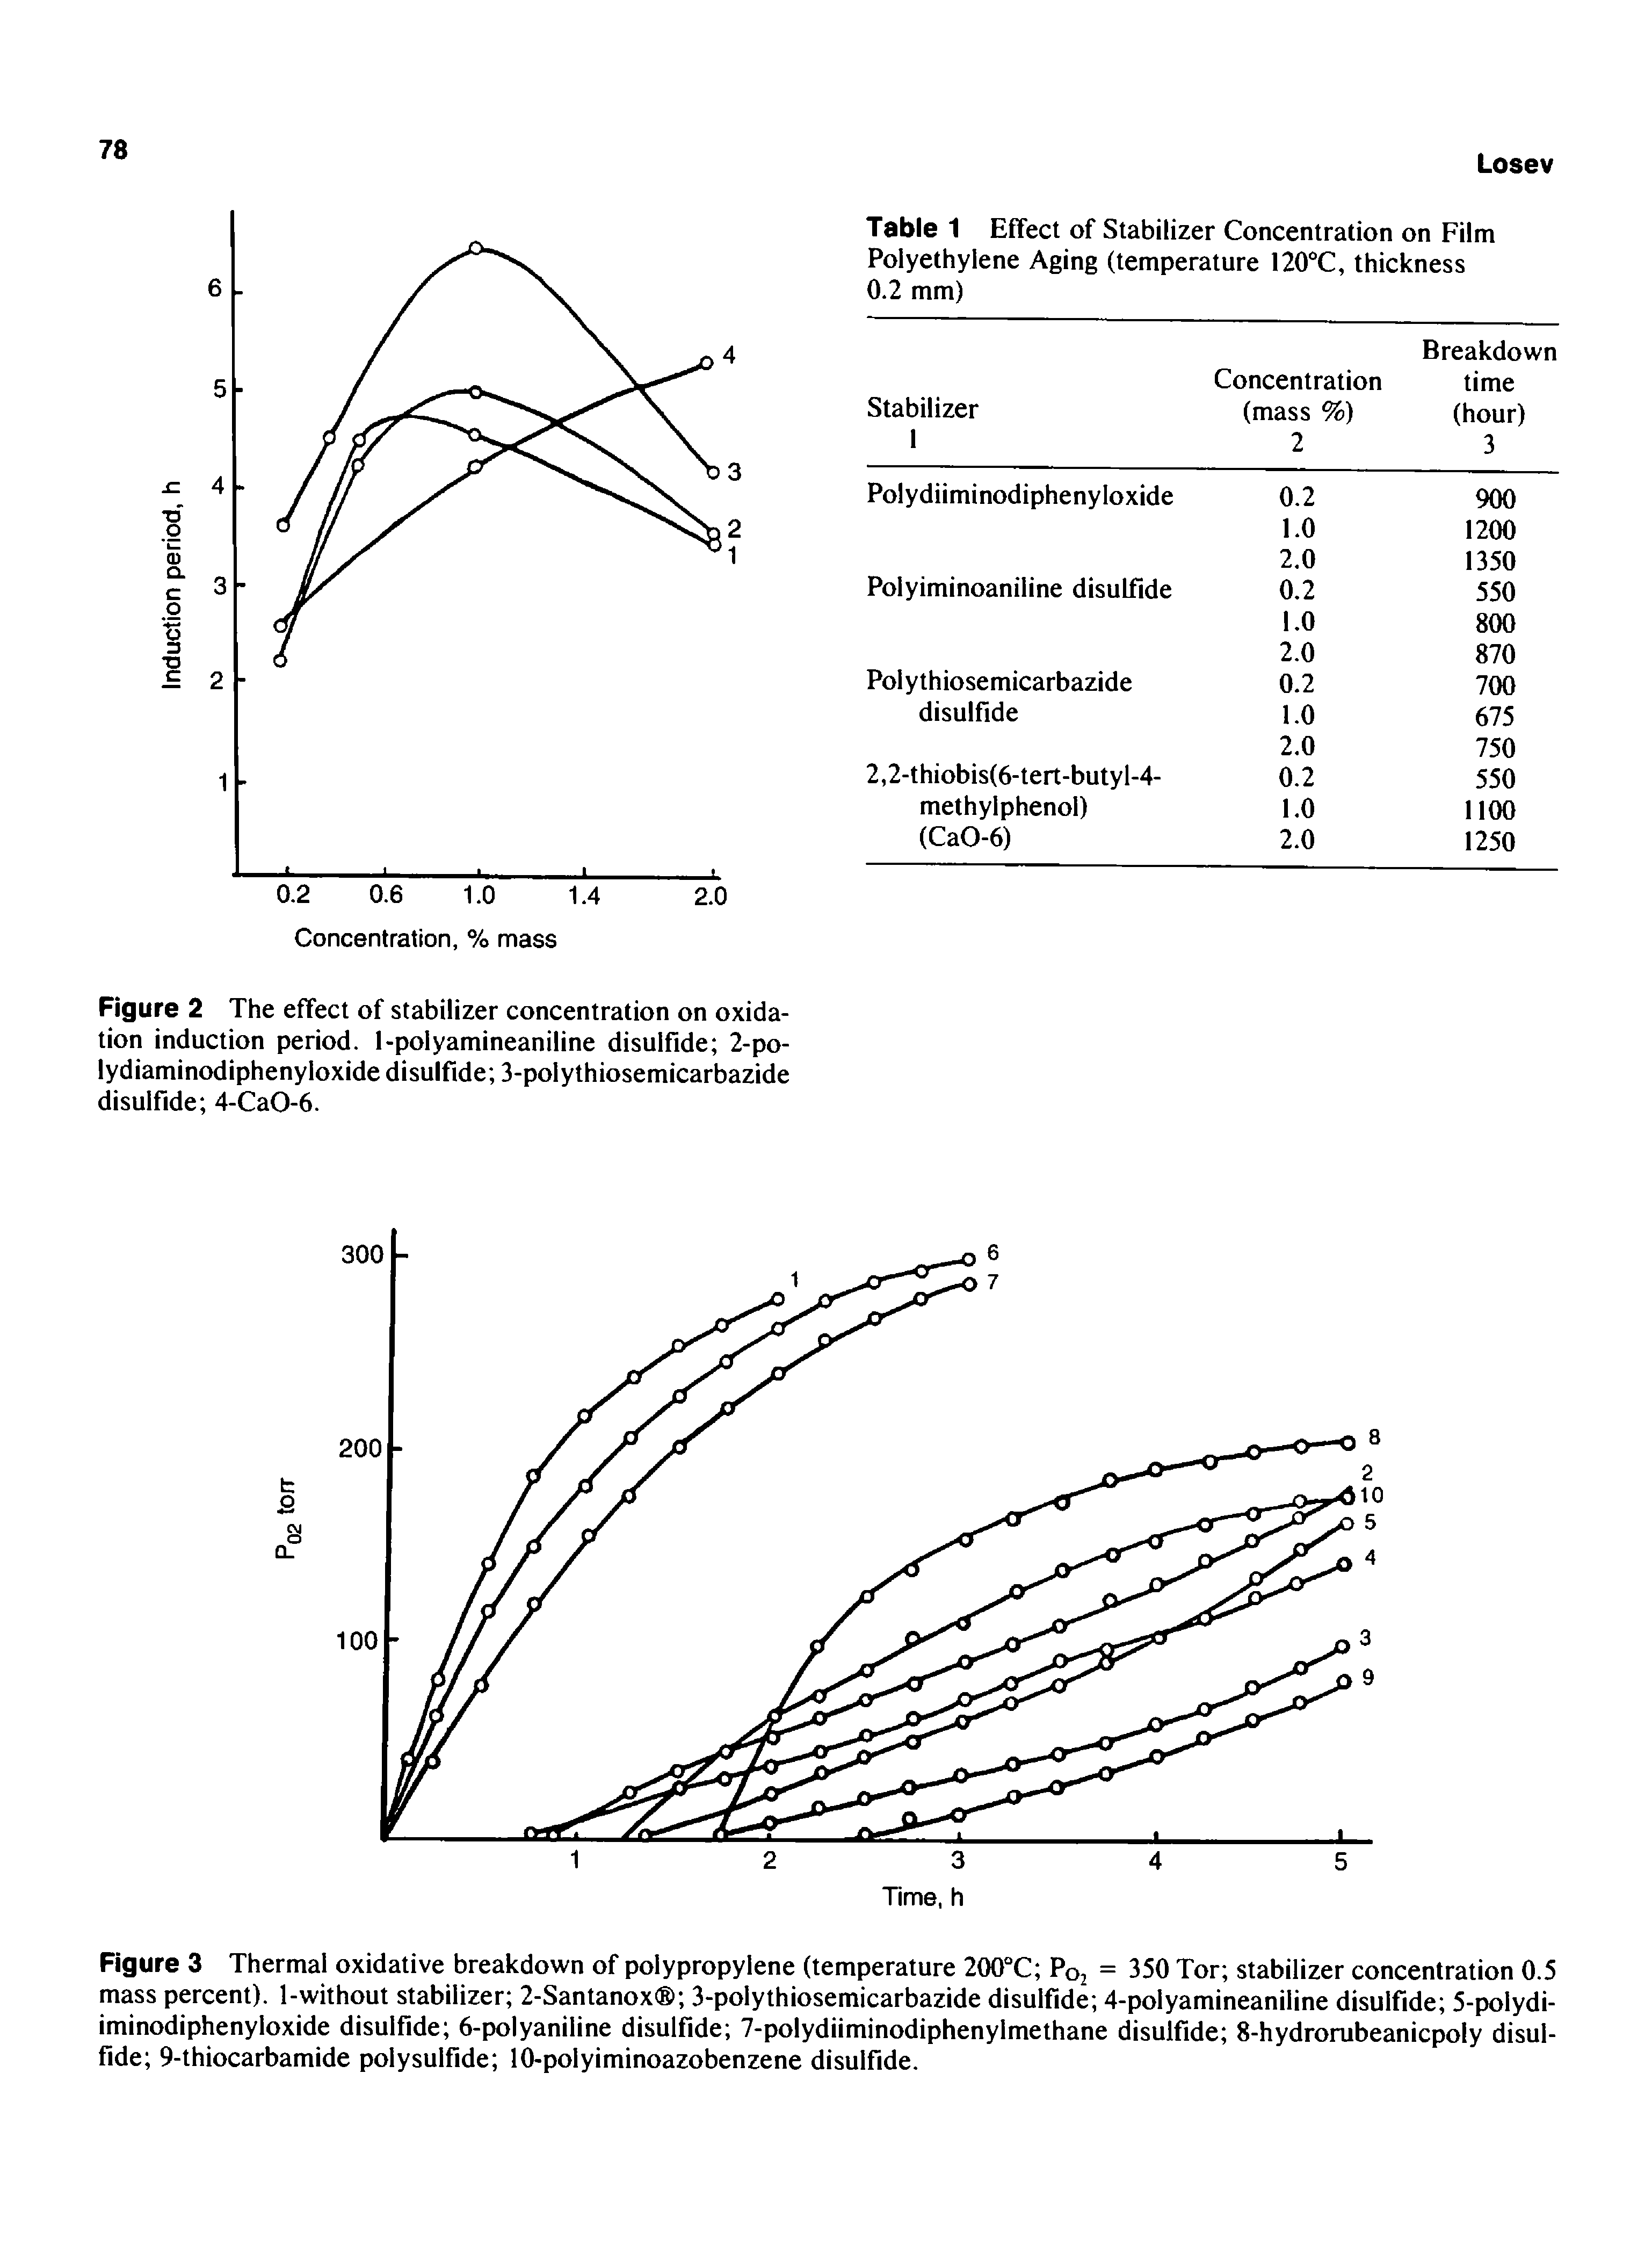 Figure 3 Thermal oxidative breakdown of polypropylene (temperature 200°C Poj = 350 Tor stabilizer concentration 0.5 mass percent). 1-without stabilizer 2-Santanox 3-polythiosemicarbazide disulfide 4-polyamineaniline disulfide 5-polydi-iminodiphenyloxide disulfide 6-polyaniline disulfide 7-polydiiminodiphenylmethane disulfide 8-hydrorubeanicpoly disulfide 9-thiocarbamide polysulfide 10-polyiminoazobenzene disulfide.